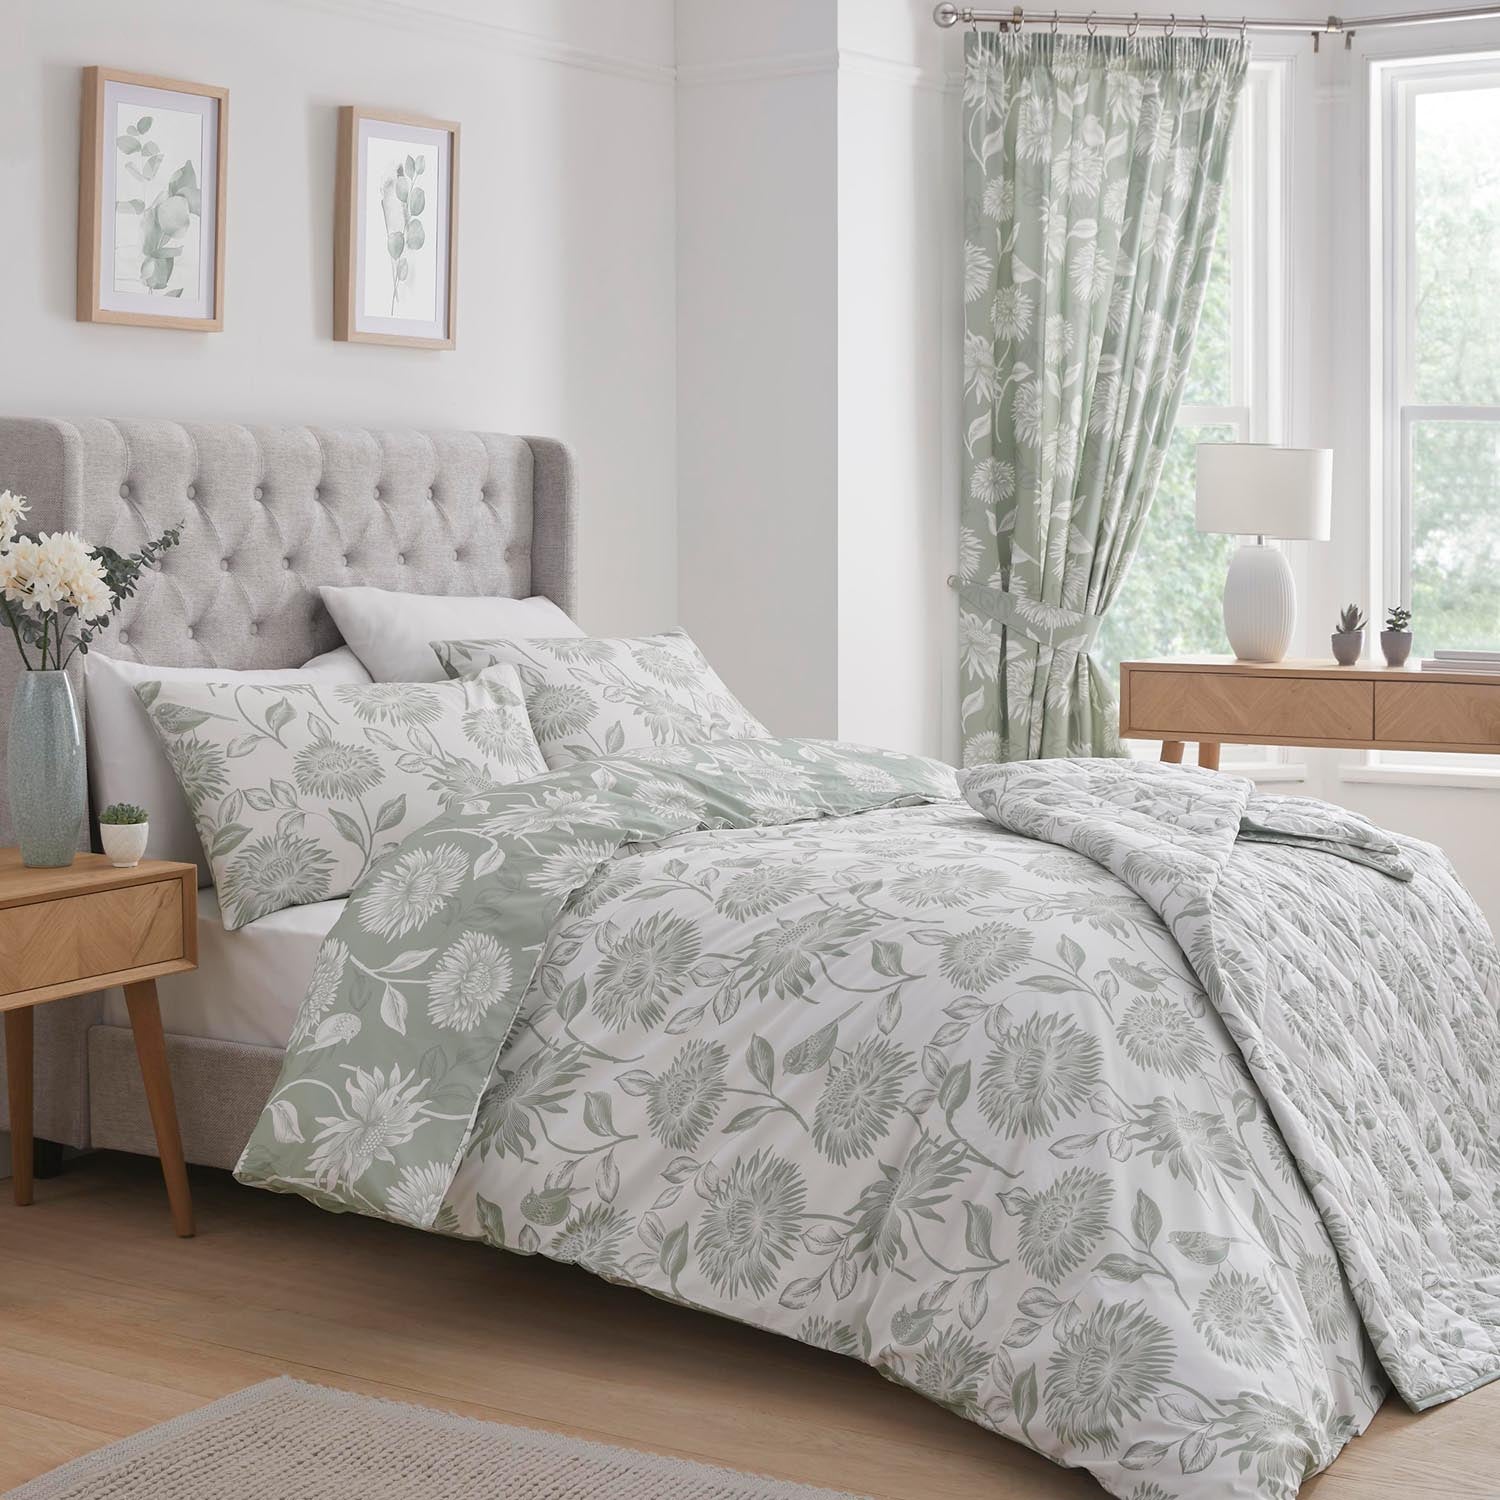  The Home Collection Veronique Teal Duvet Cover Set 3 Shaws Department Stores